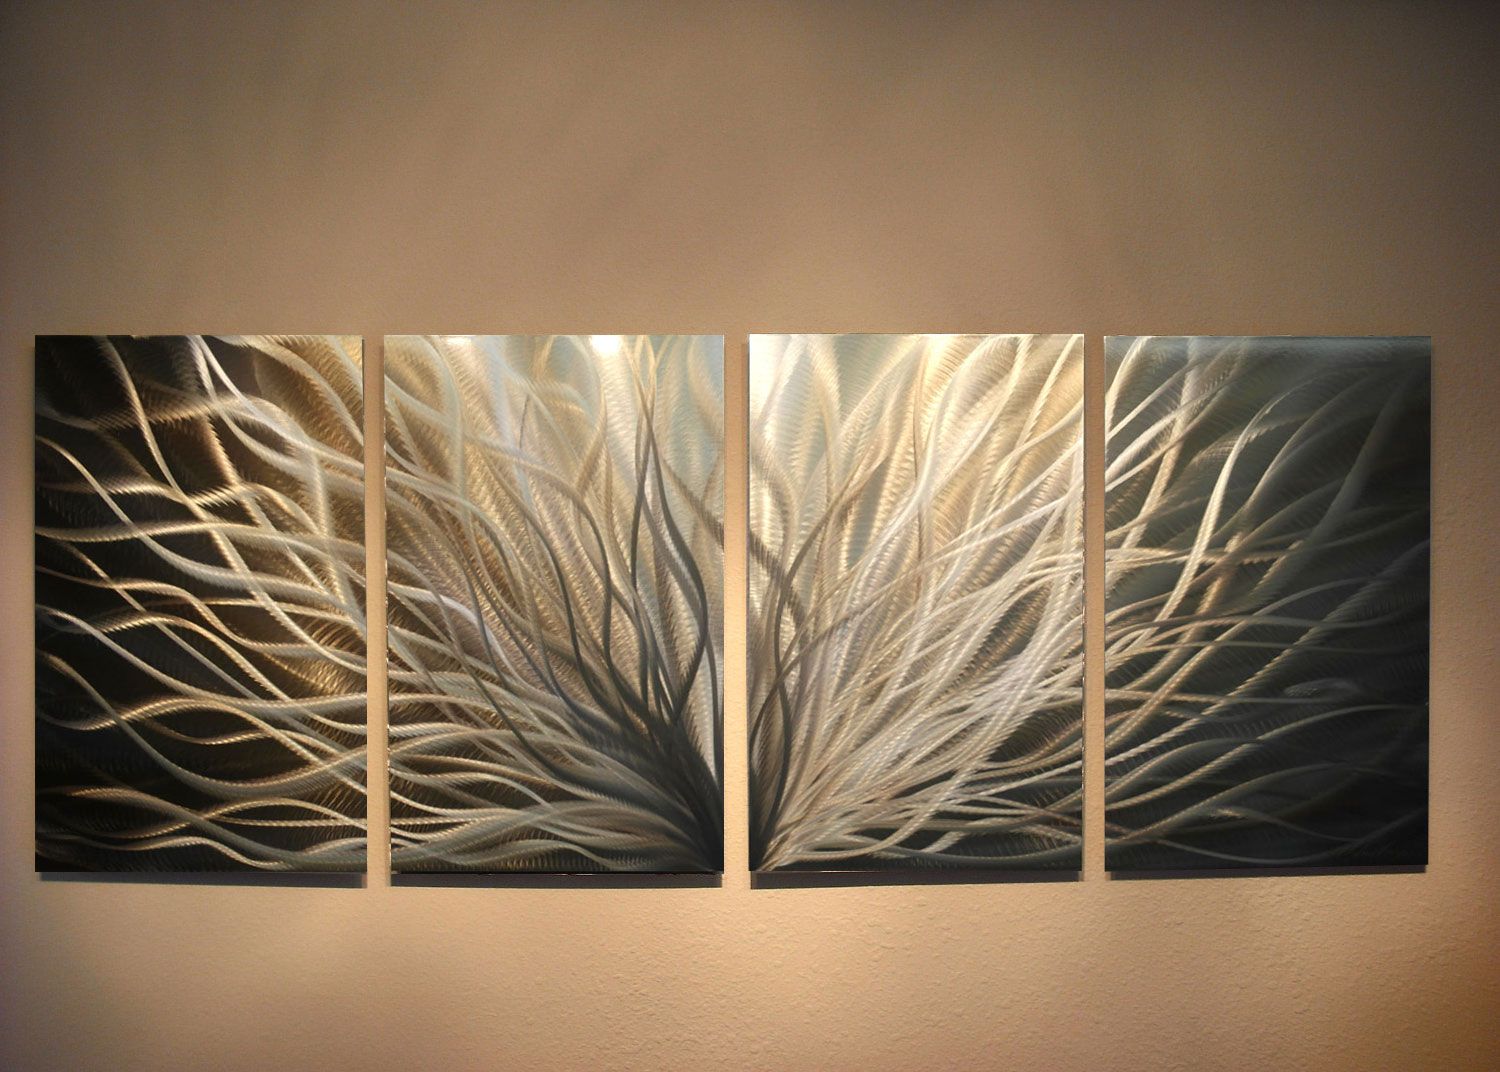 Abstract Metal Wall Art  Radiance Gold Silver  Contemporary Modern Pertaining To Best And Newest Legion Metal Wall Art (View 9 of 20)